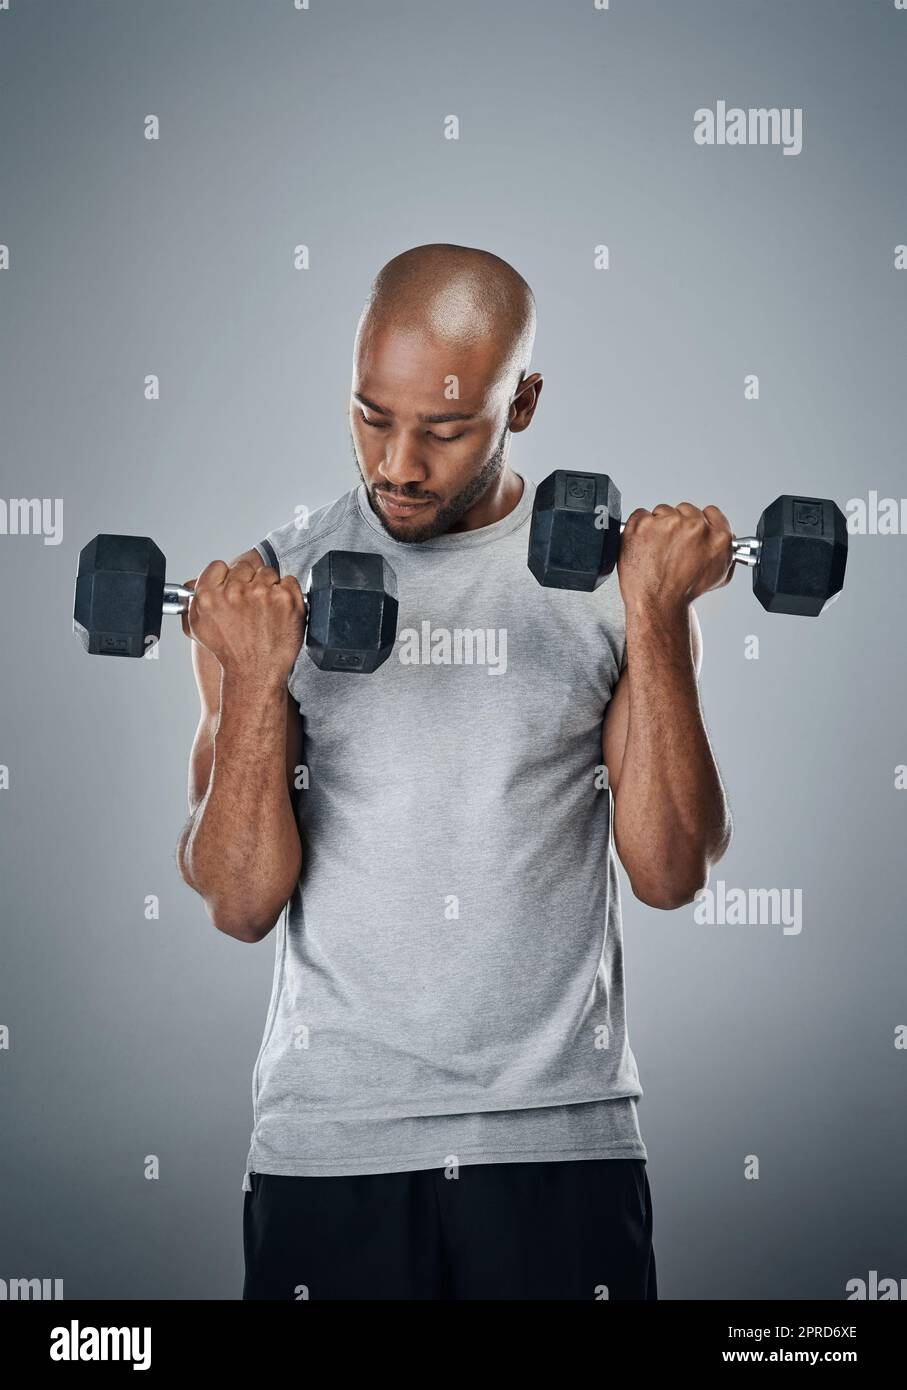 Work on a stronger and you. a sporty young man working out with weights against a grey background. Stock Photo